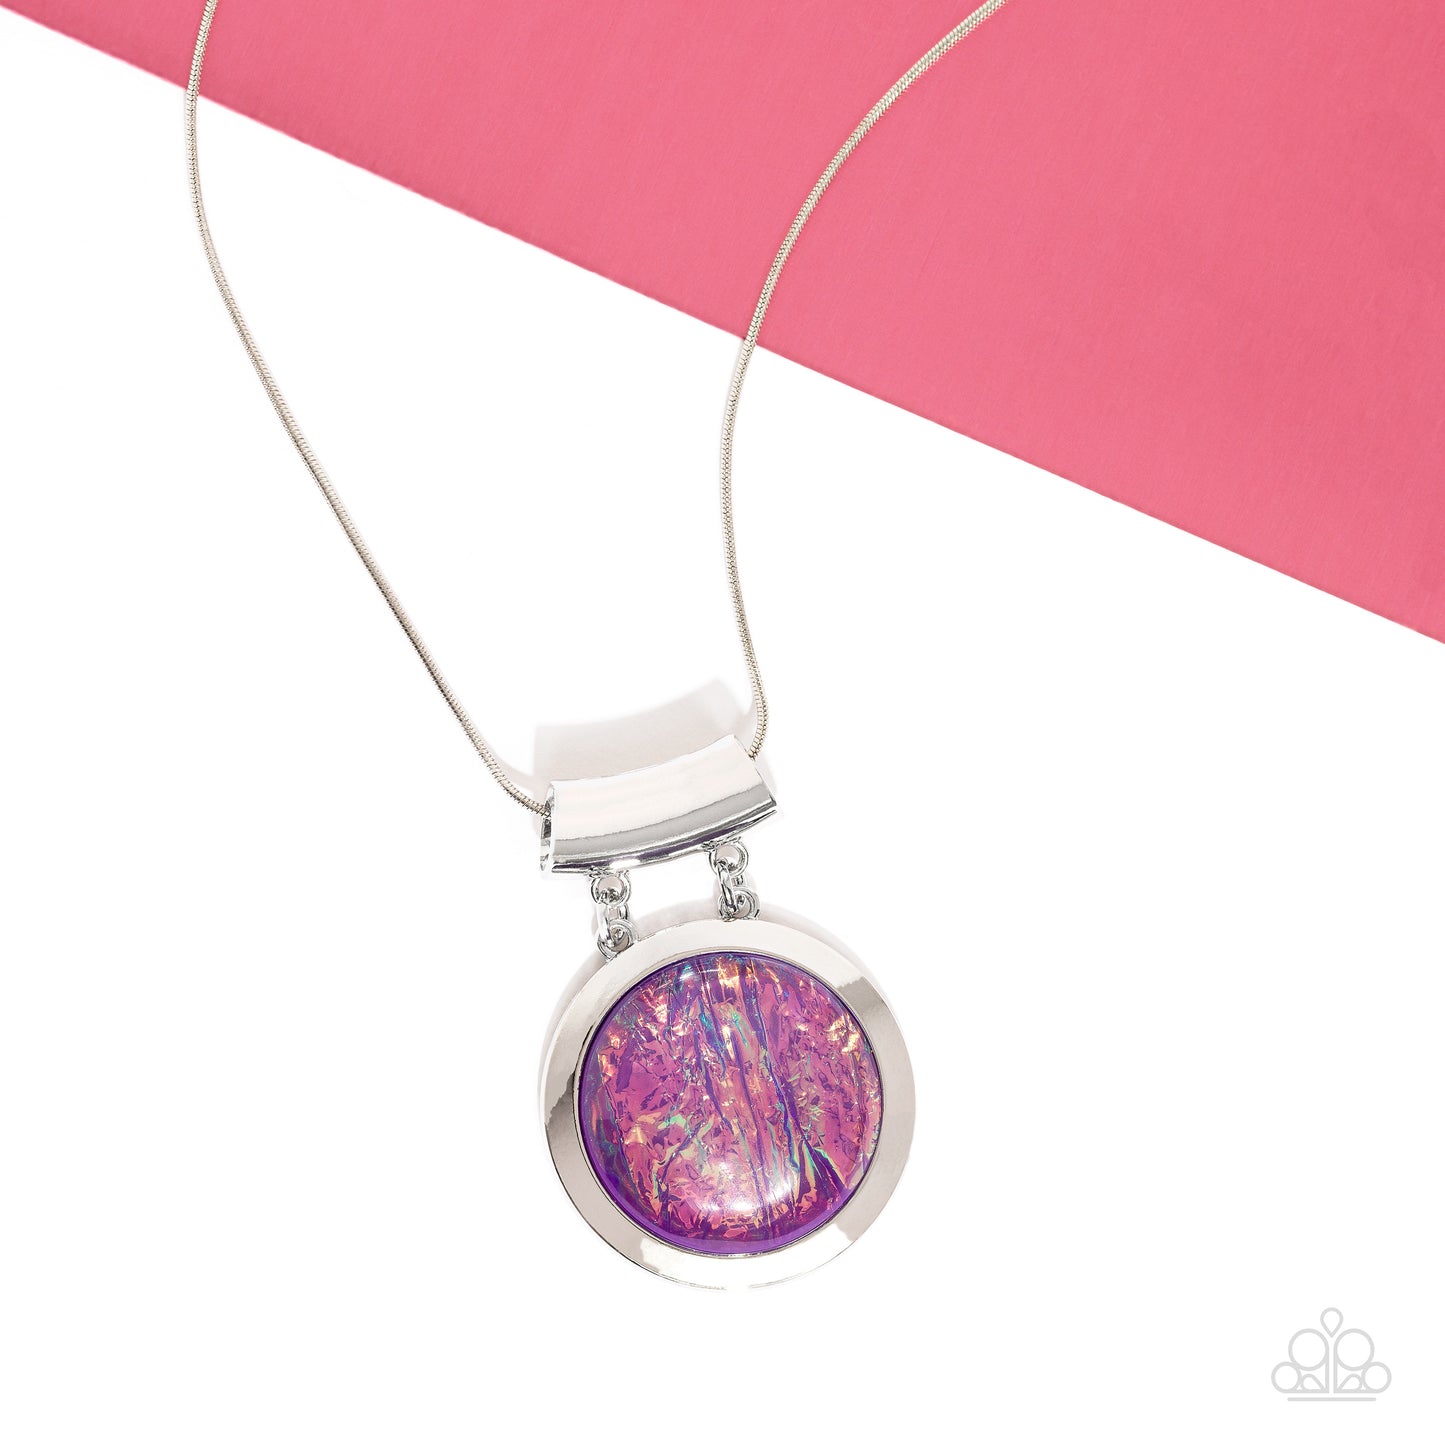 Paparazzi Accessories Starlight Starbright - Purple Featuring a refracted shimmer and an opalescent finish, an oversized, glassy purple gem falls along the chest on a silver snake chain to create a hypnotic pop of color. The exaggerated sparkle is pressed